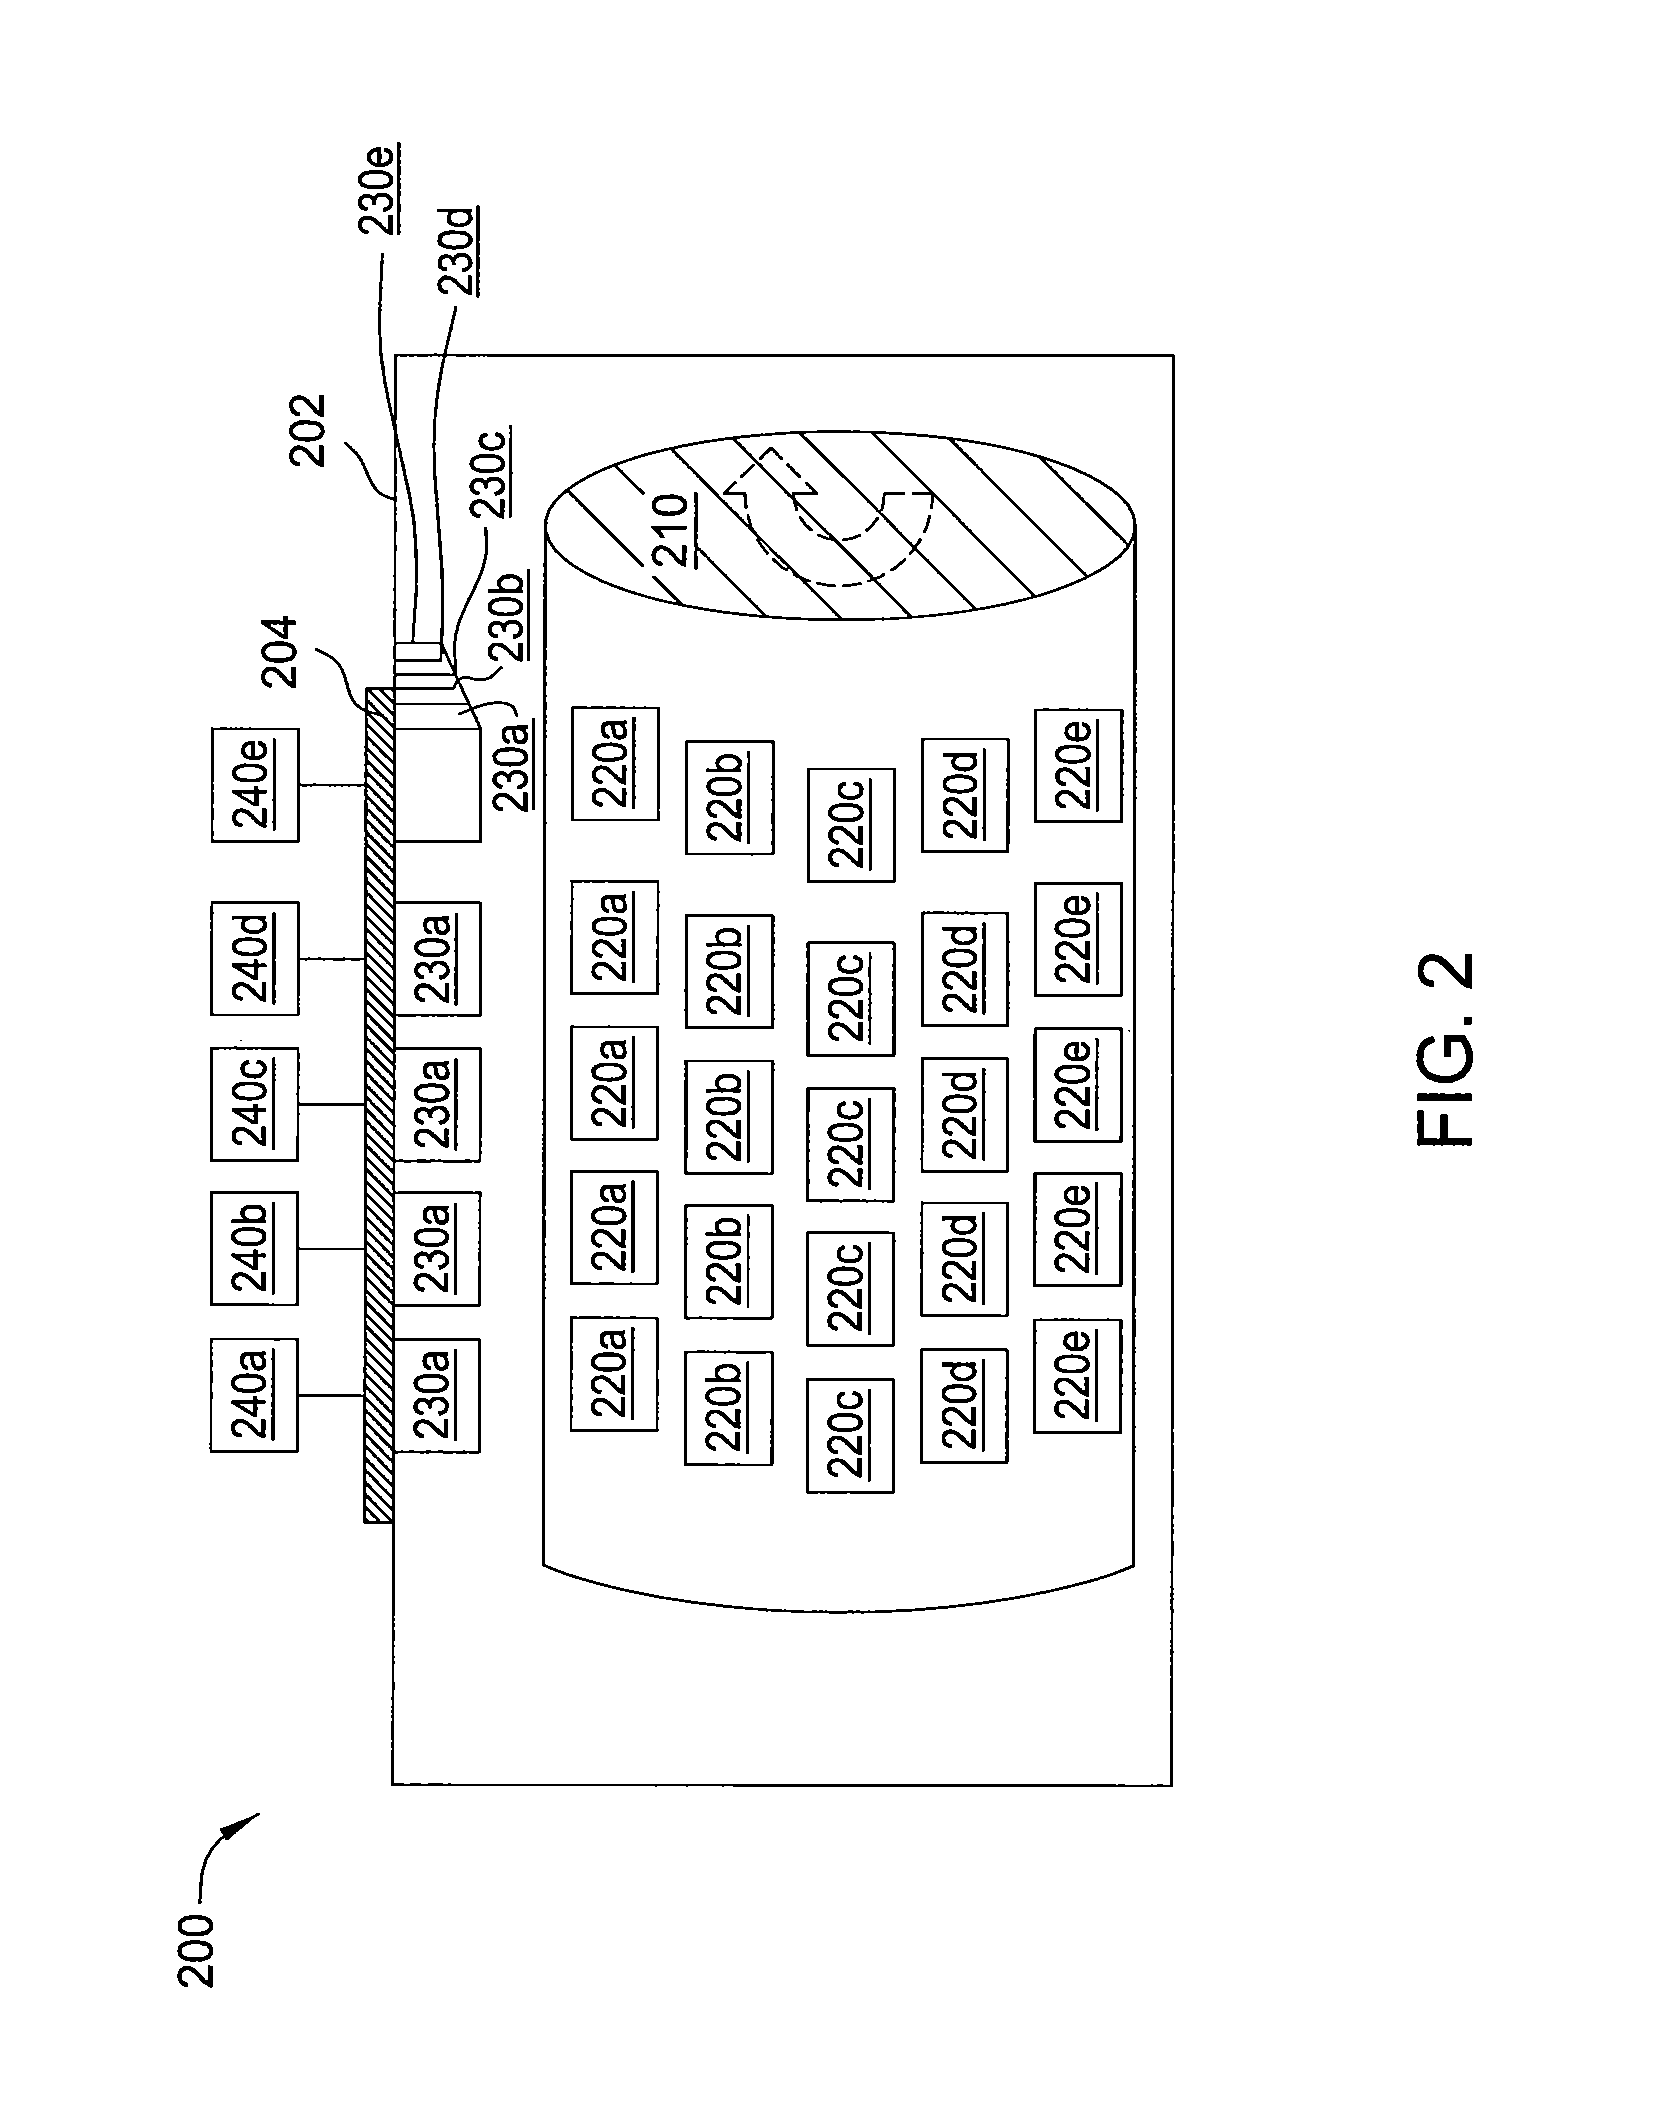 Multiple stack deposition for epitaxial lift off